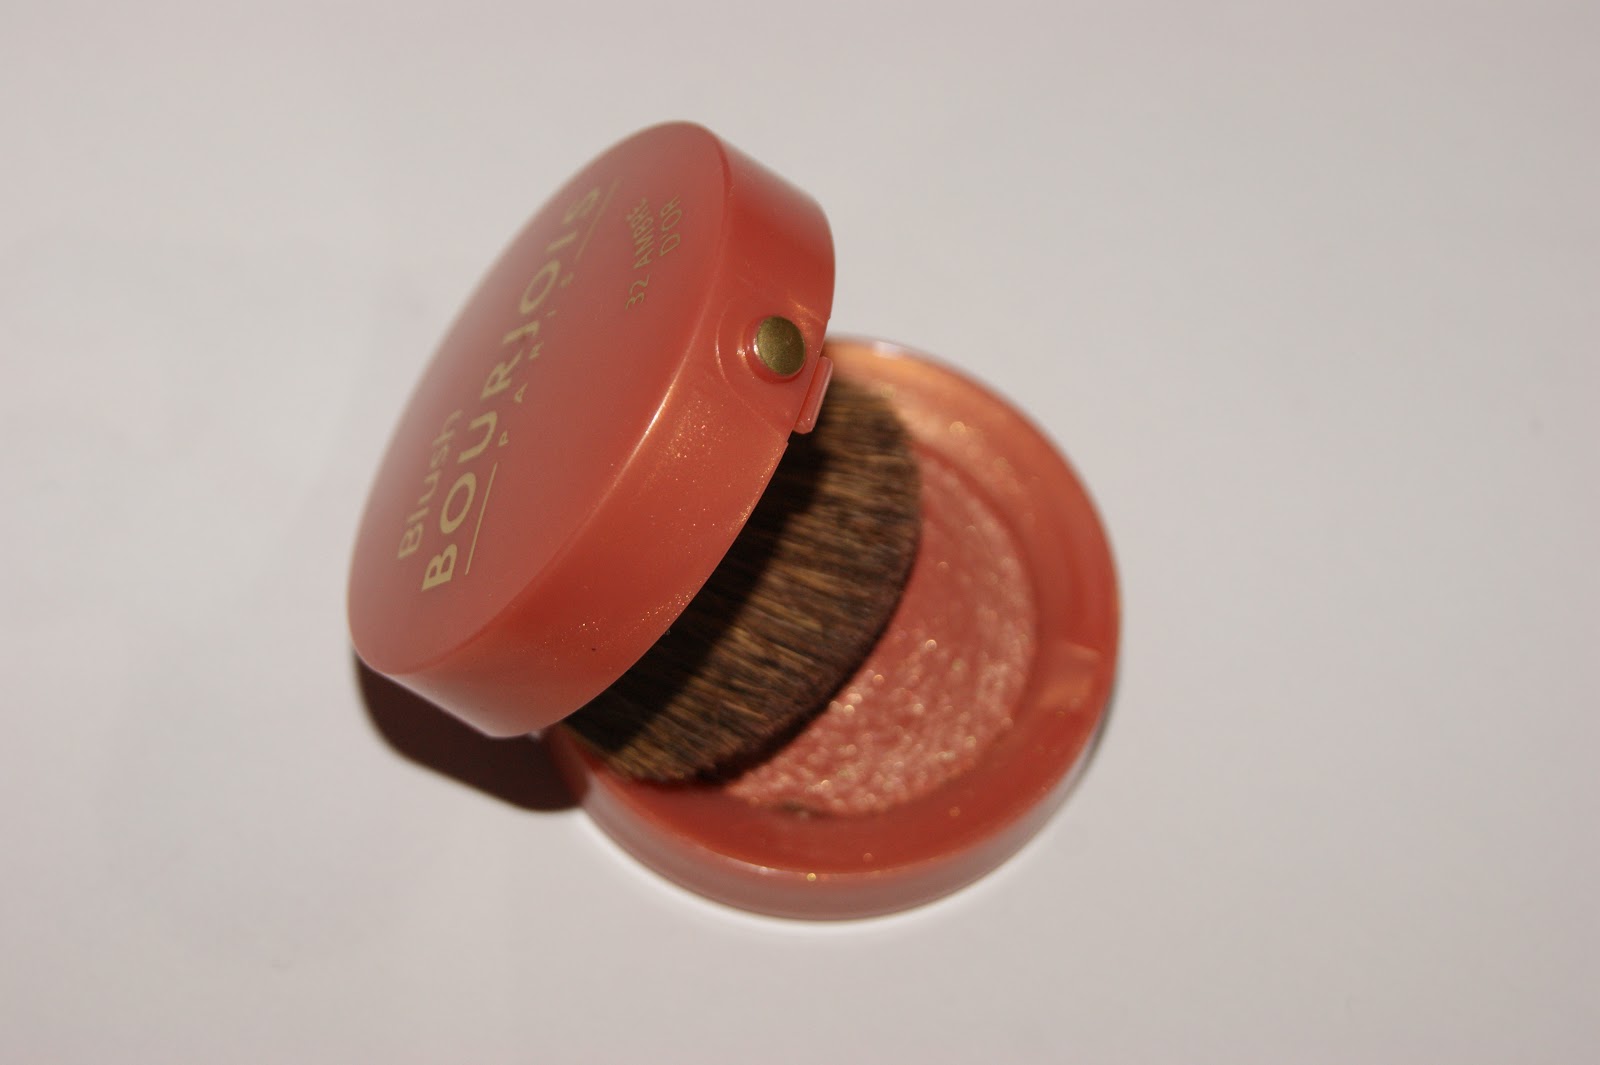 Bourjois Little Round Pot Blush in 32 Ambre D'Or - Review